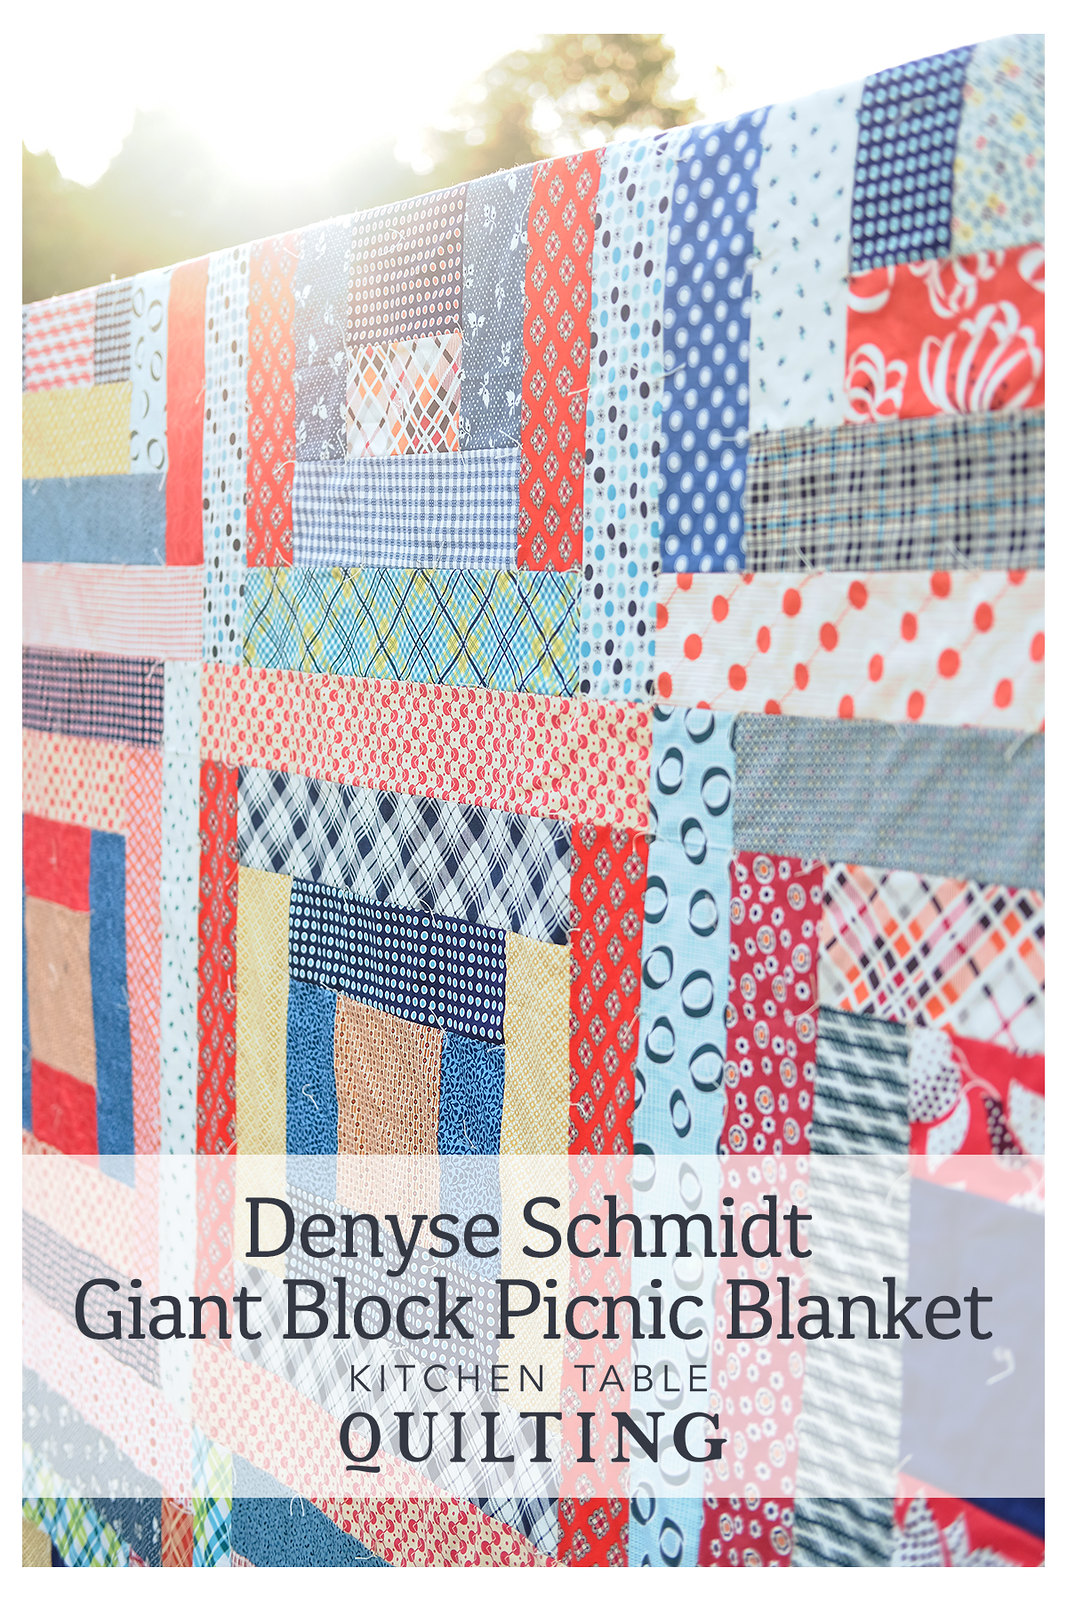 May Giant Block Quilt - Denyse Schmidt Picnic Quilt